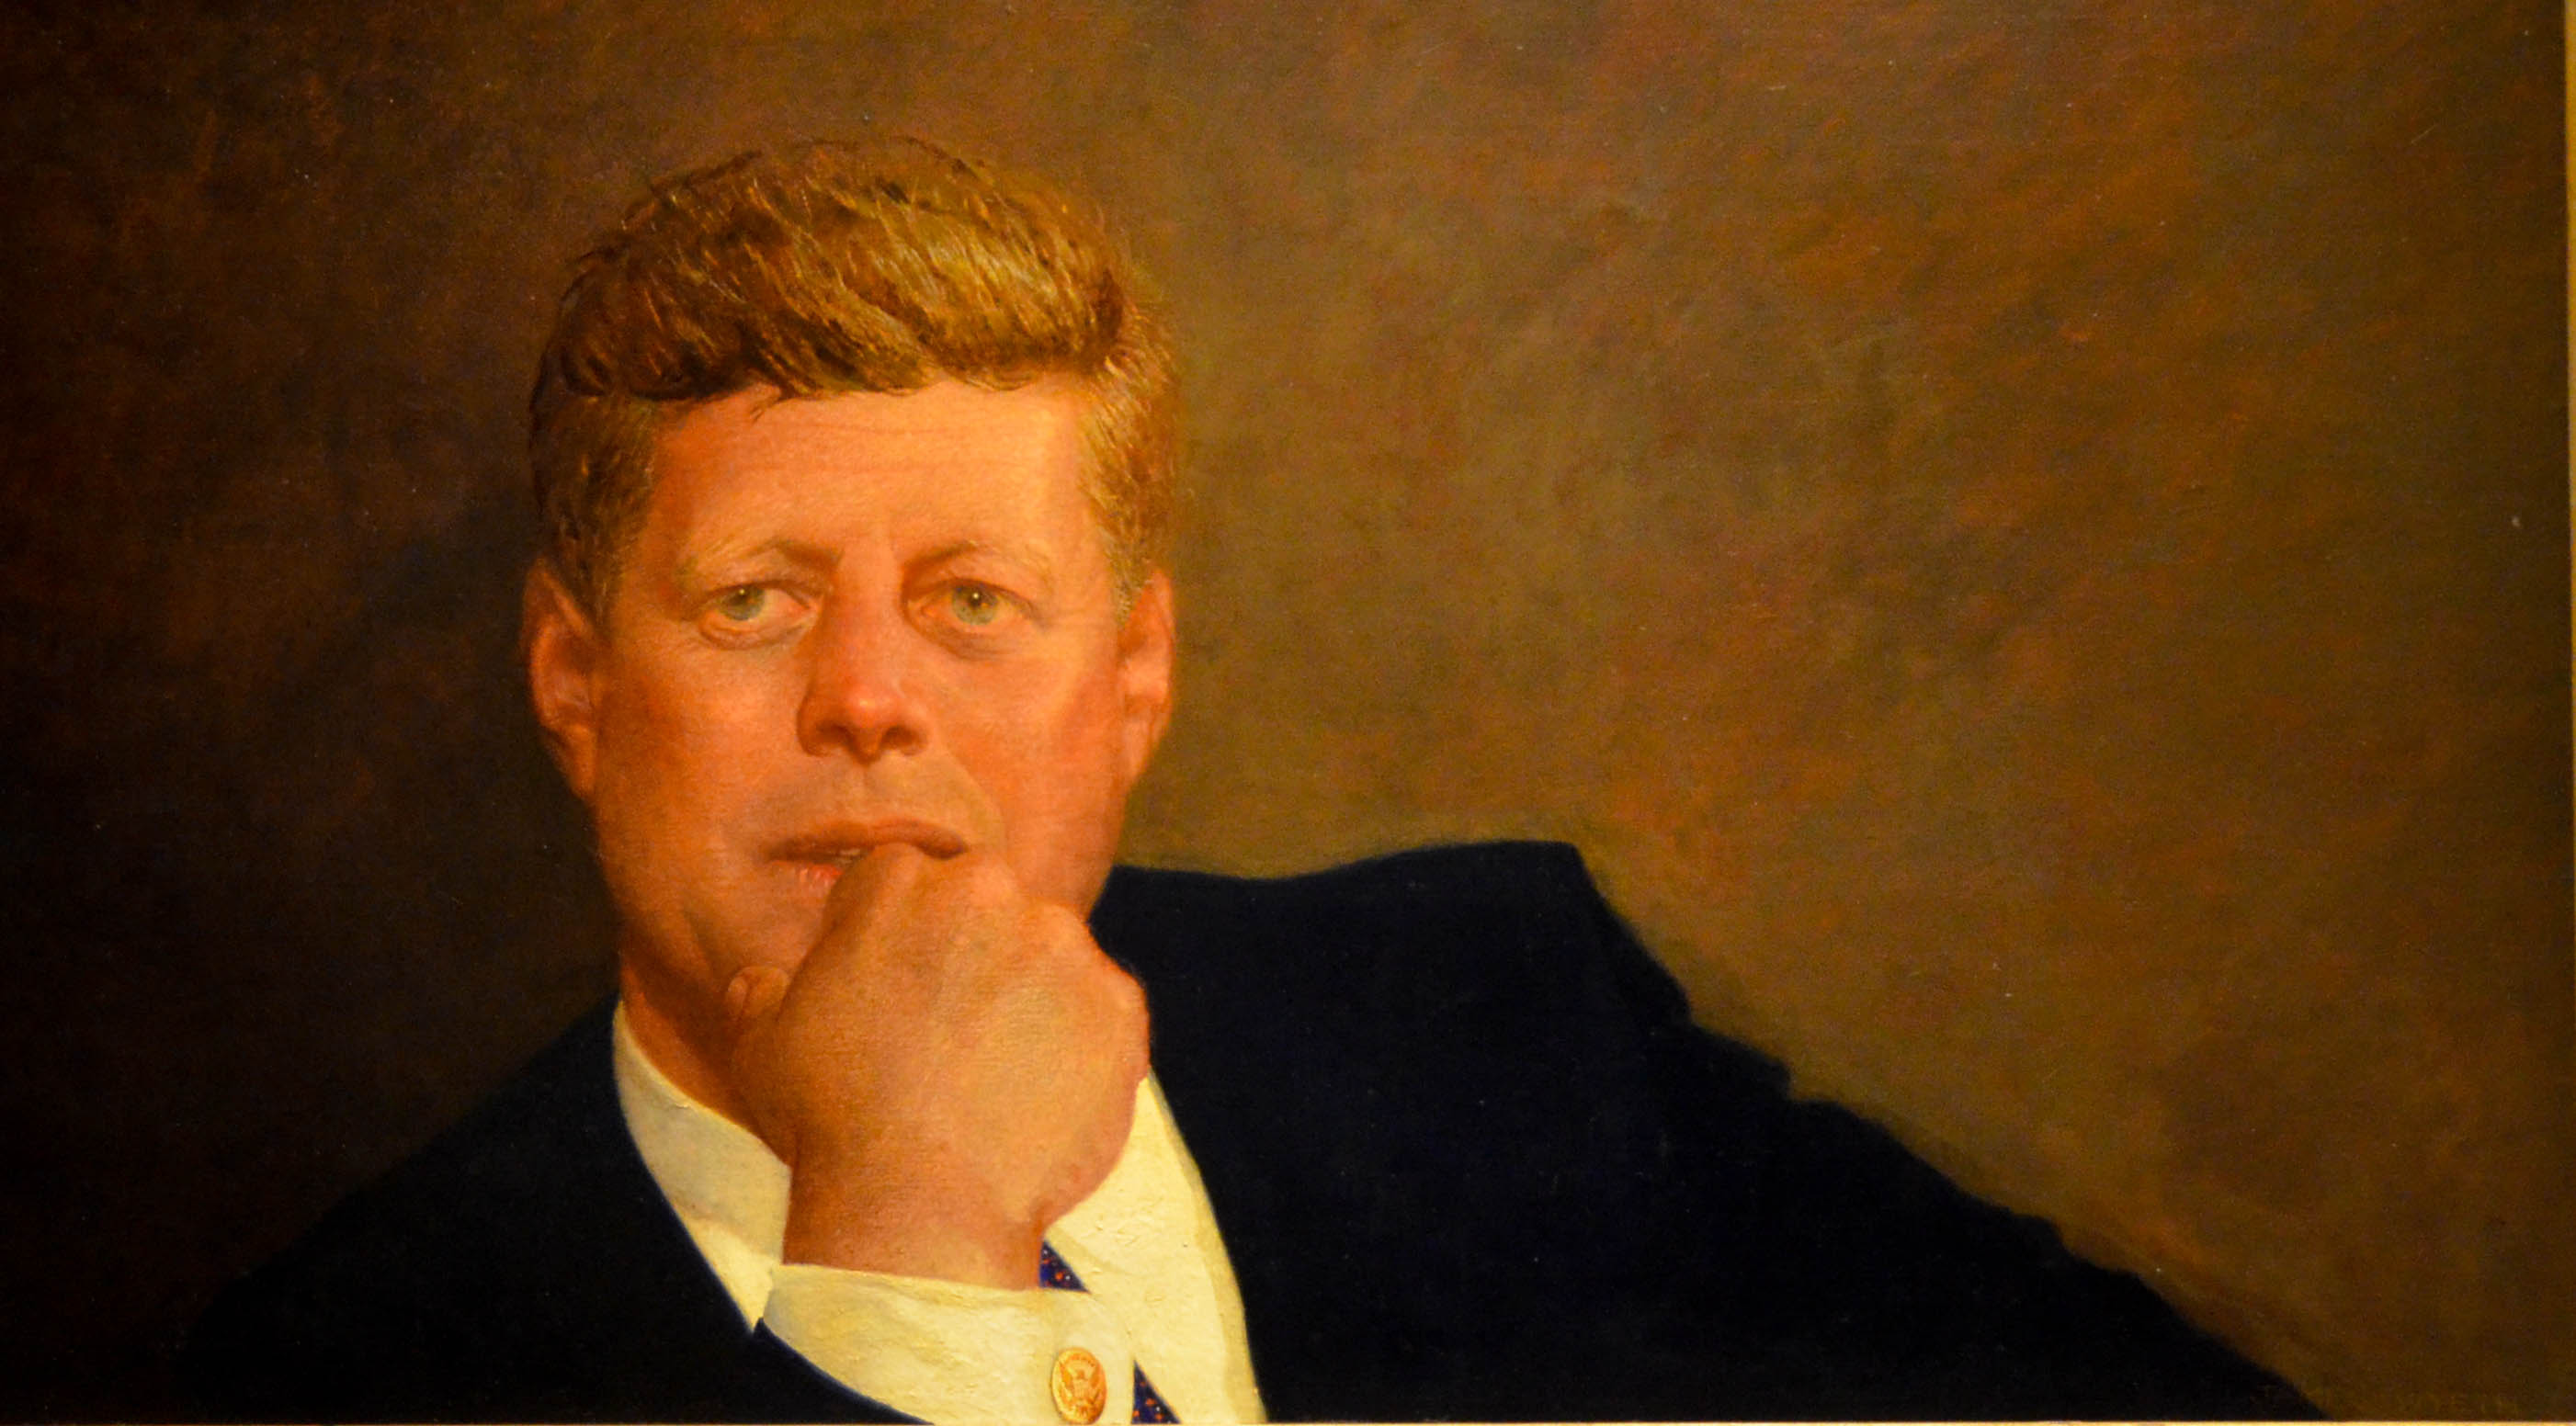 This portrait of Kennedy was used on an Irish stamp.